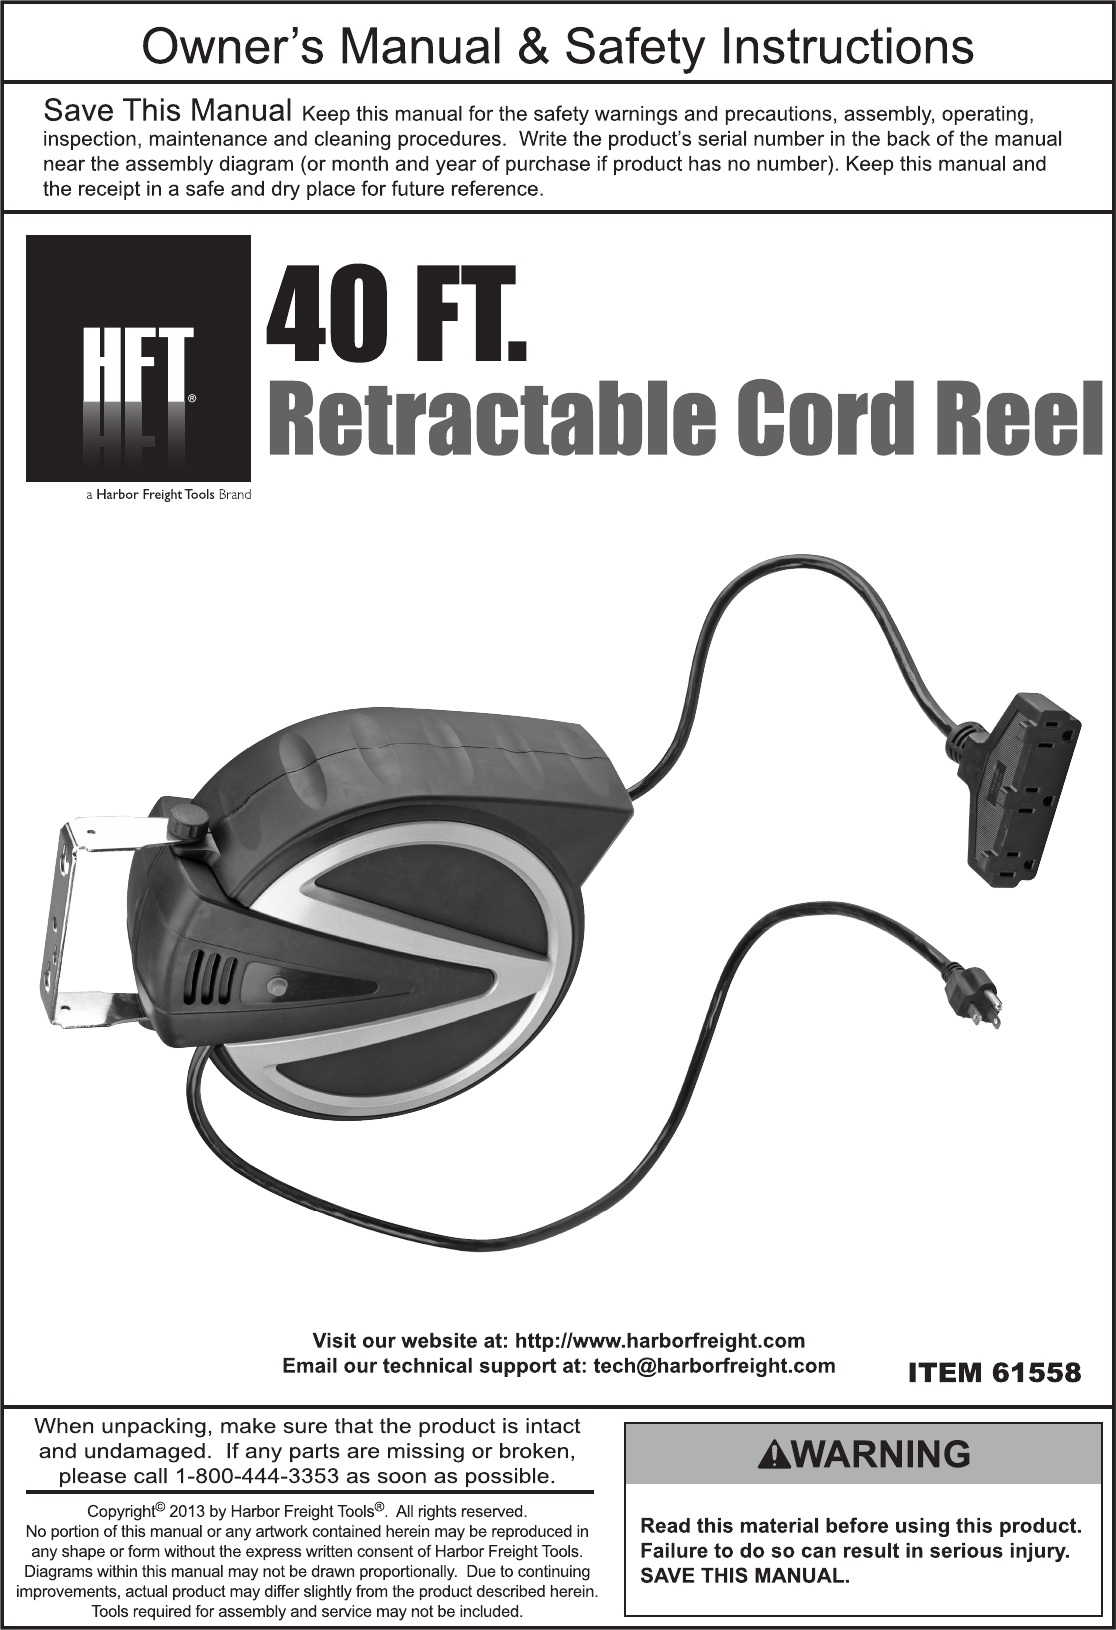 Page 1 of 4 - Harbor-Freight Harbor-Freight-40-Ft-Retractable-Cord-Reel-With-Triple-Tap-Product-Manual-  Harbor-freight-40-ft-retractable-cord-reel-with-triple-tap-product-manual